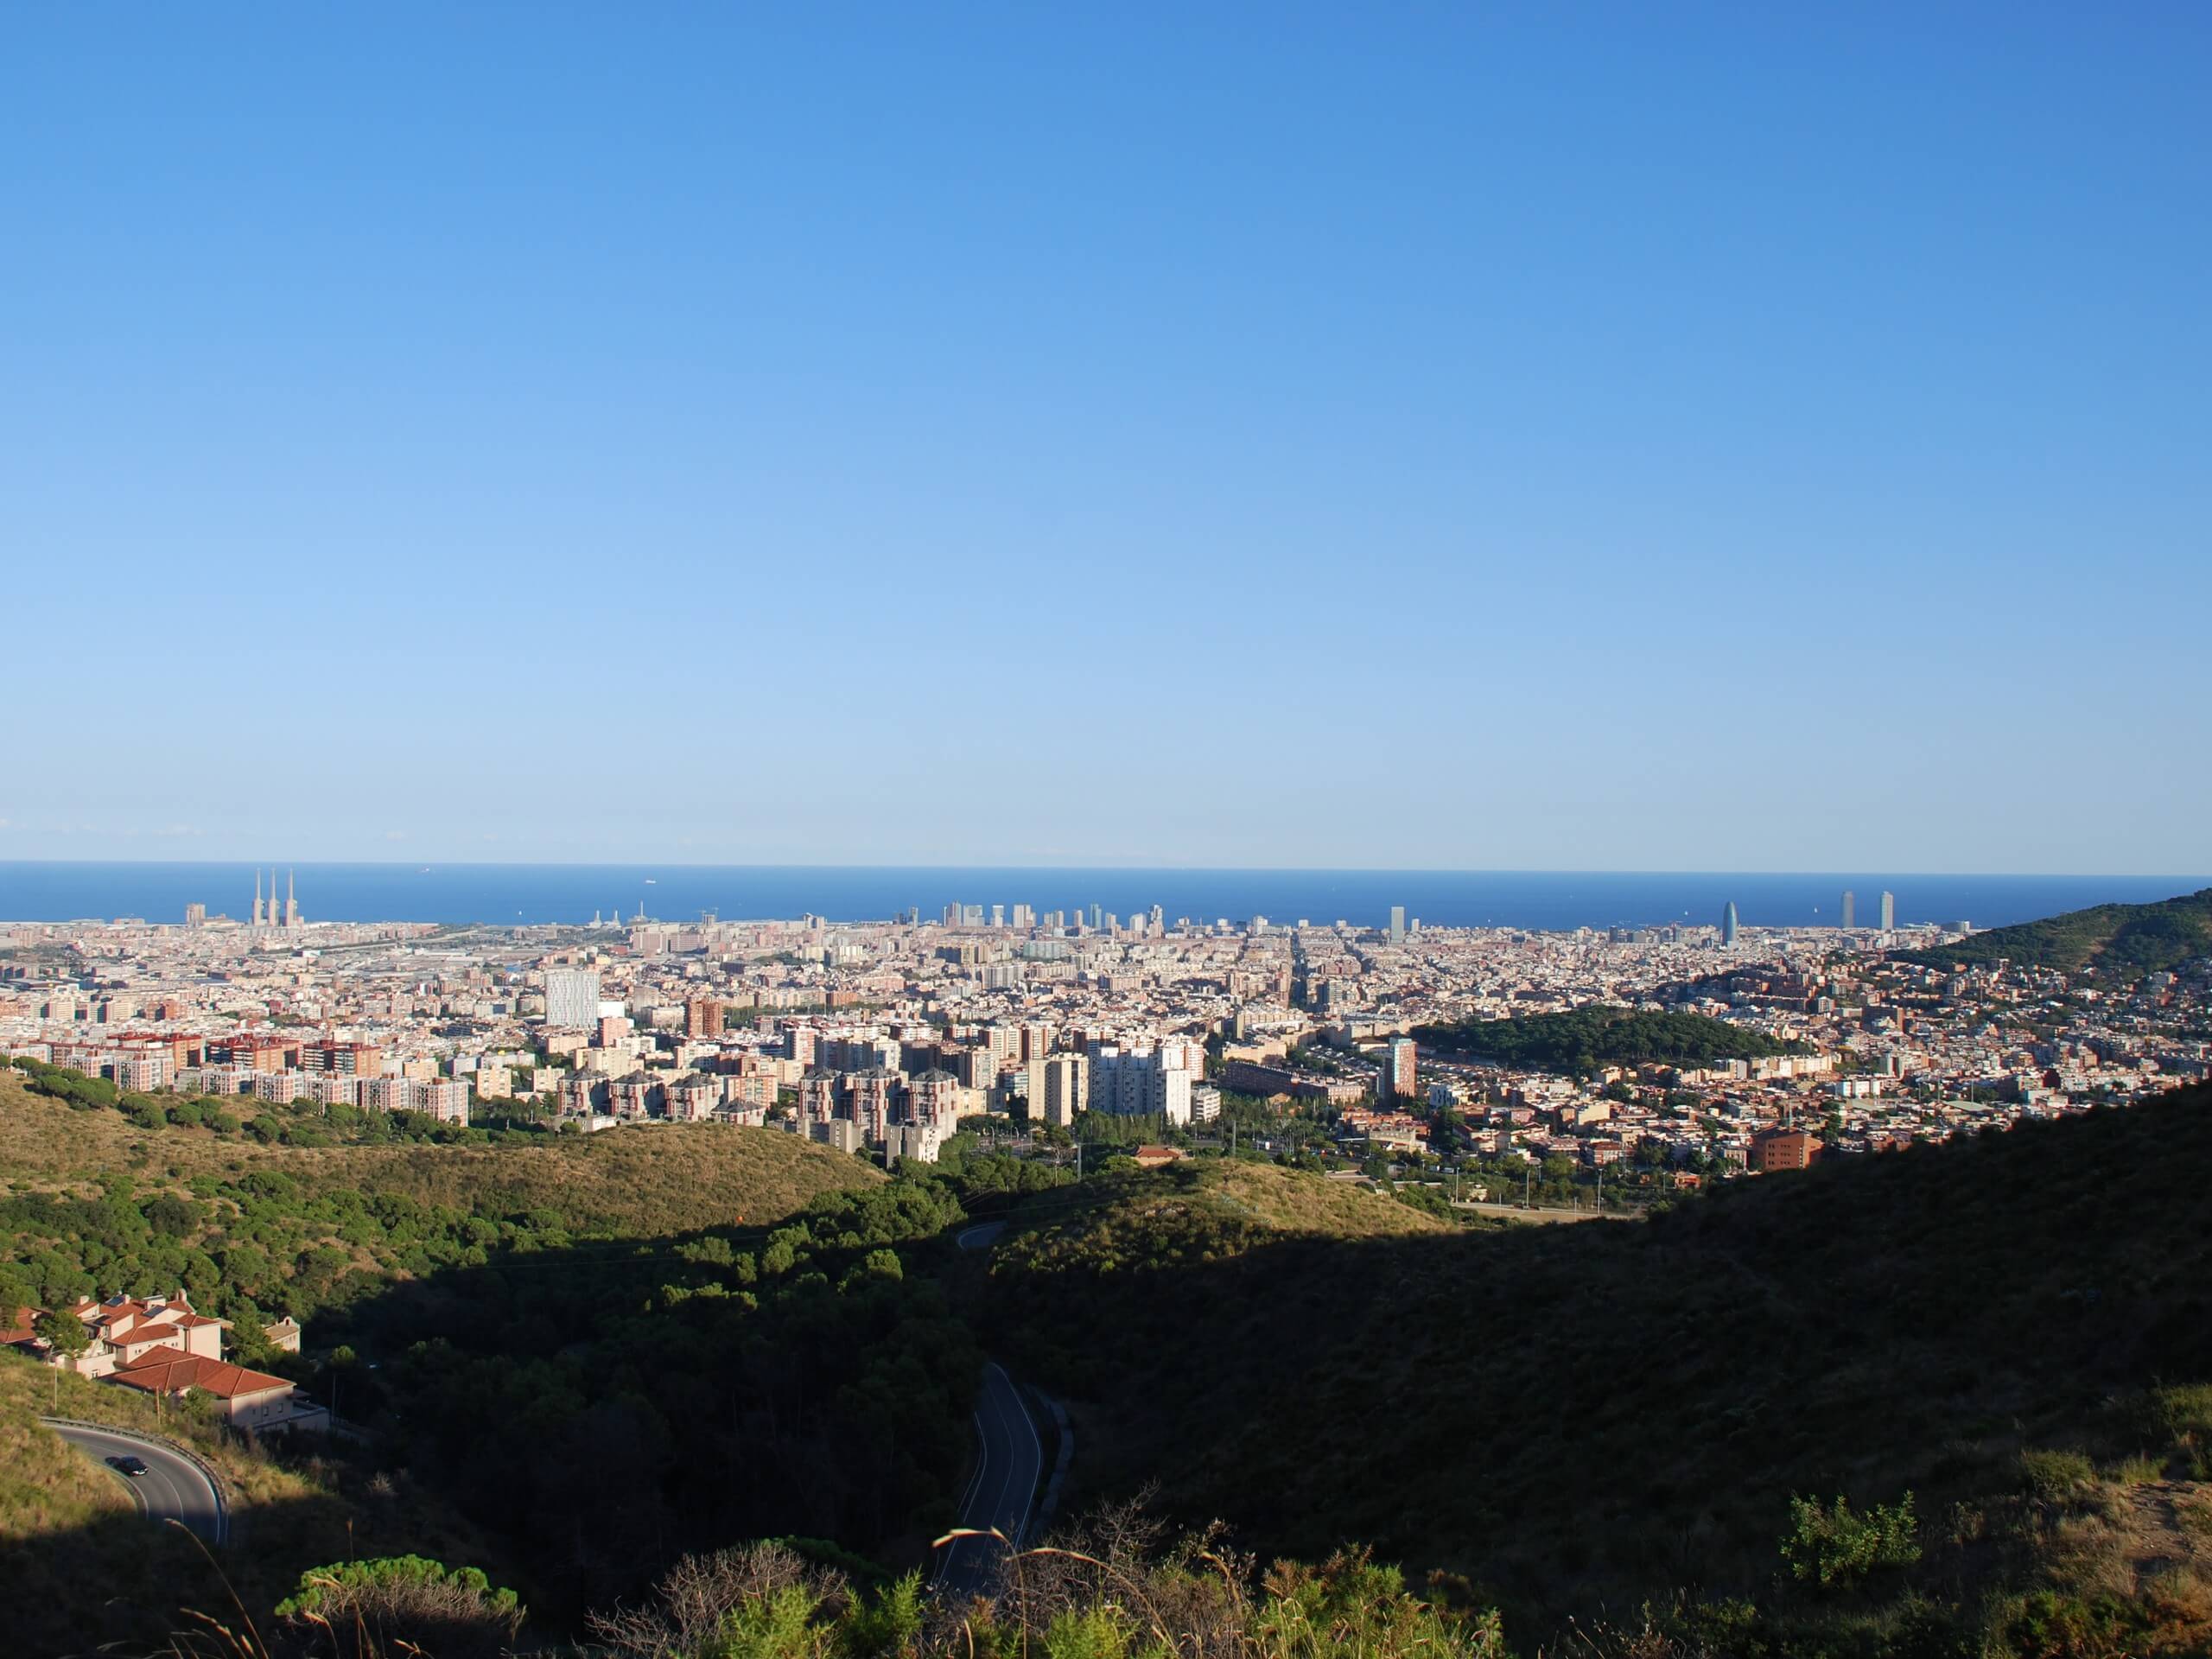 Barcelona as seen from the above